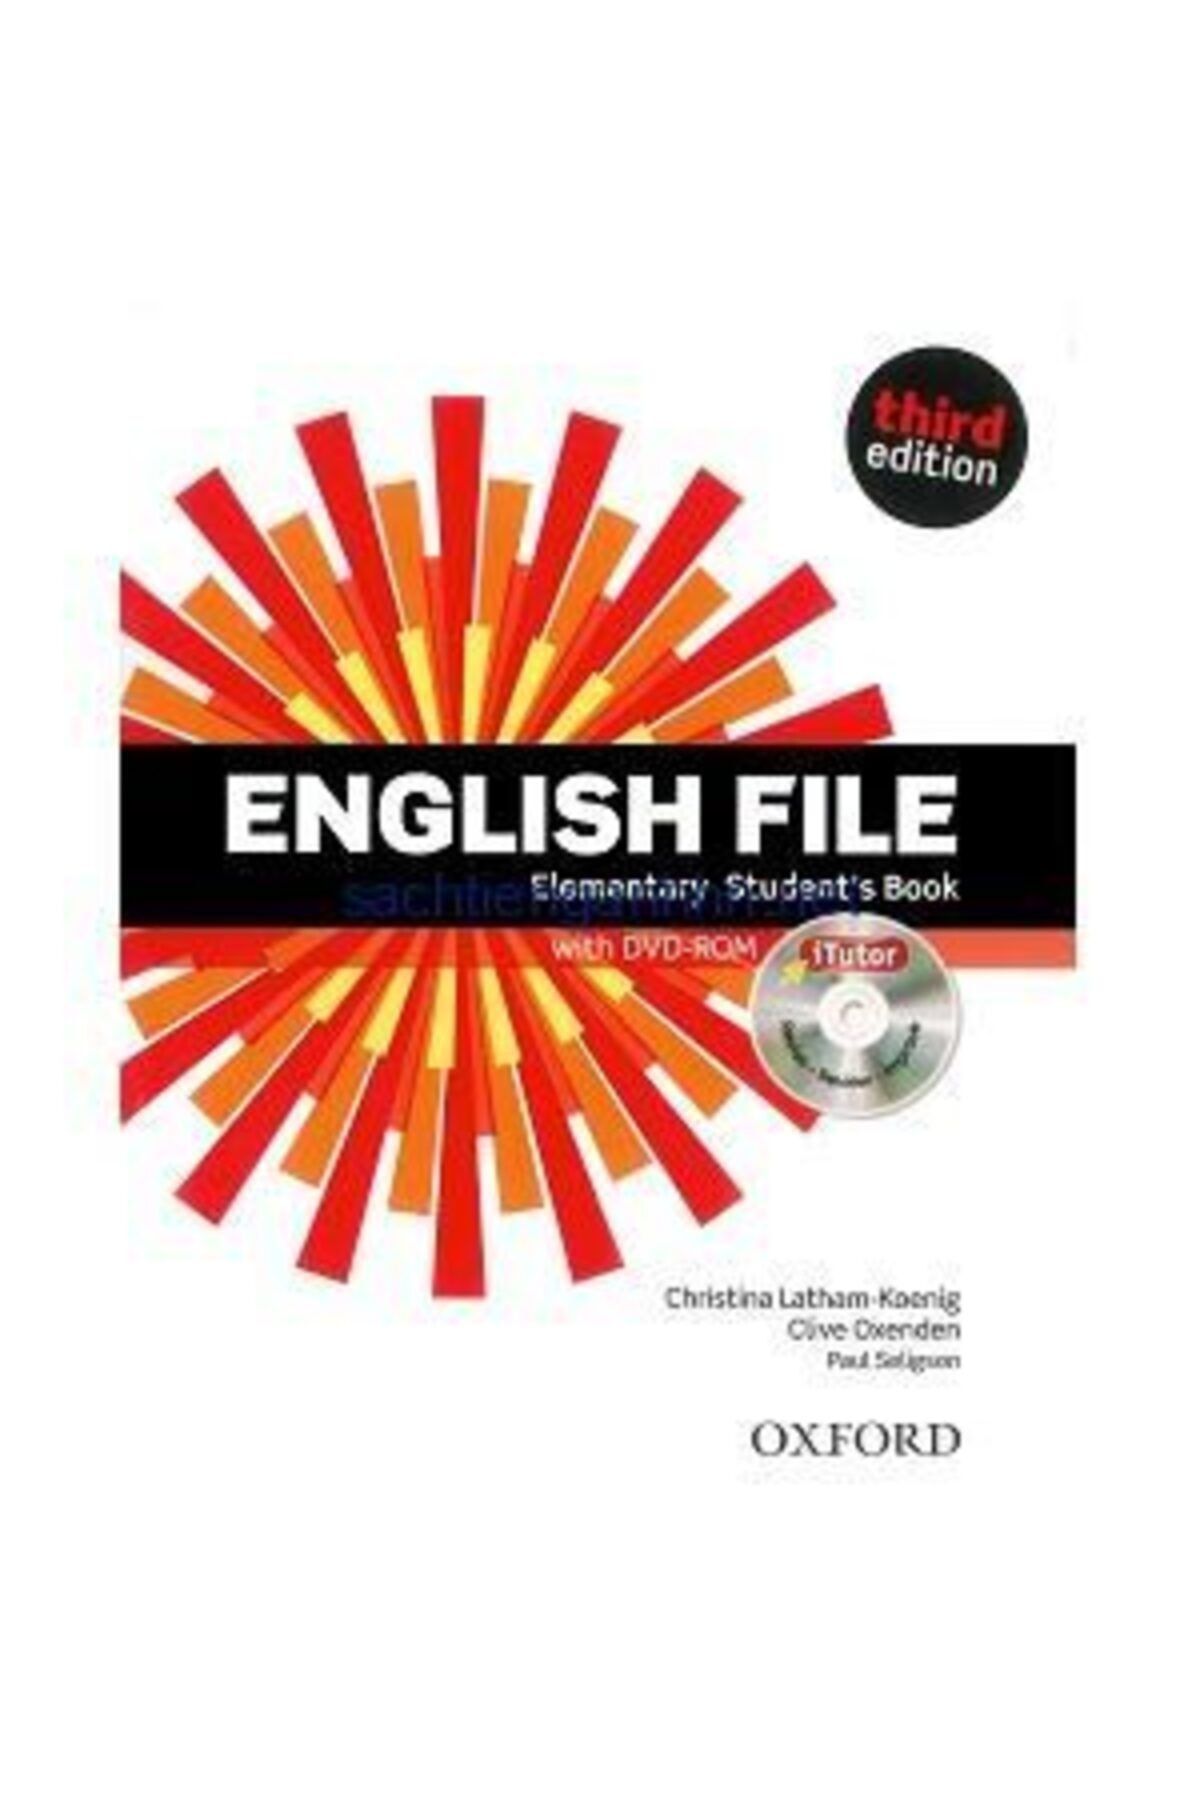 English file: Elementary. DVD. English file: Elementary. Teaching English book Cover. Everyday English book Cover graphic. Elementary books 3 edition